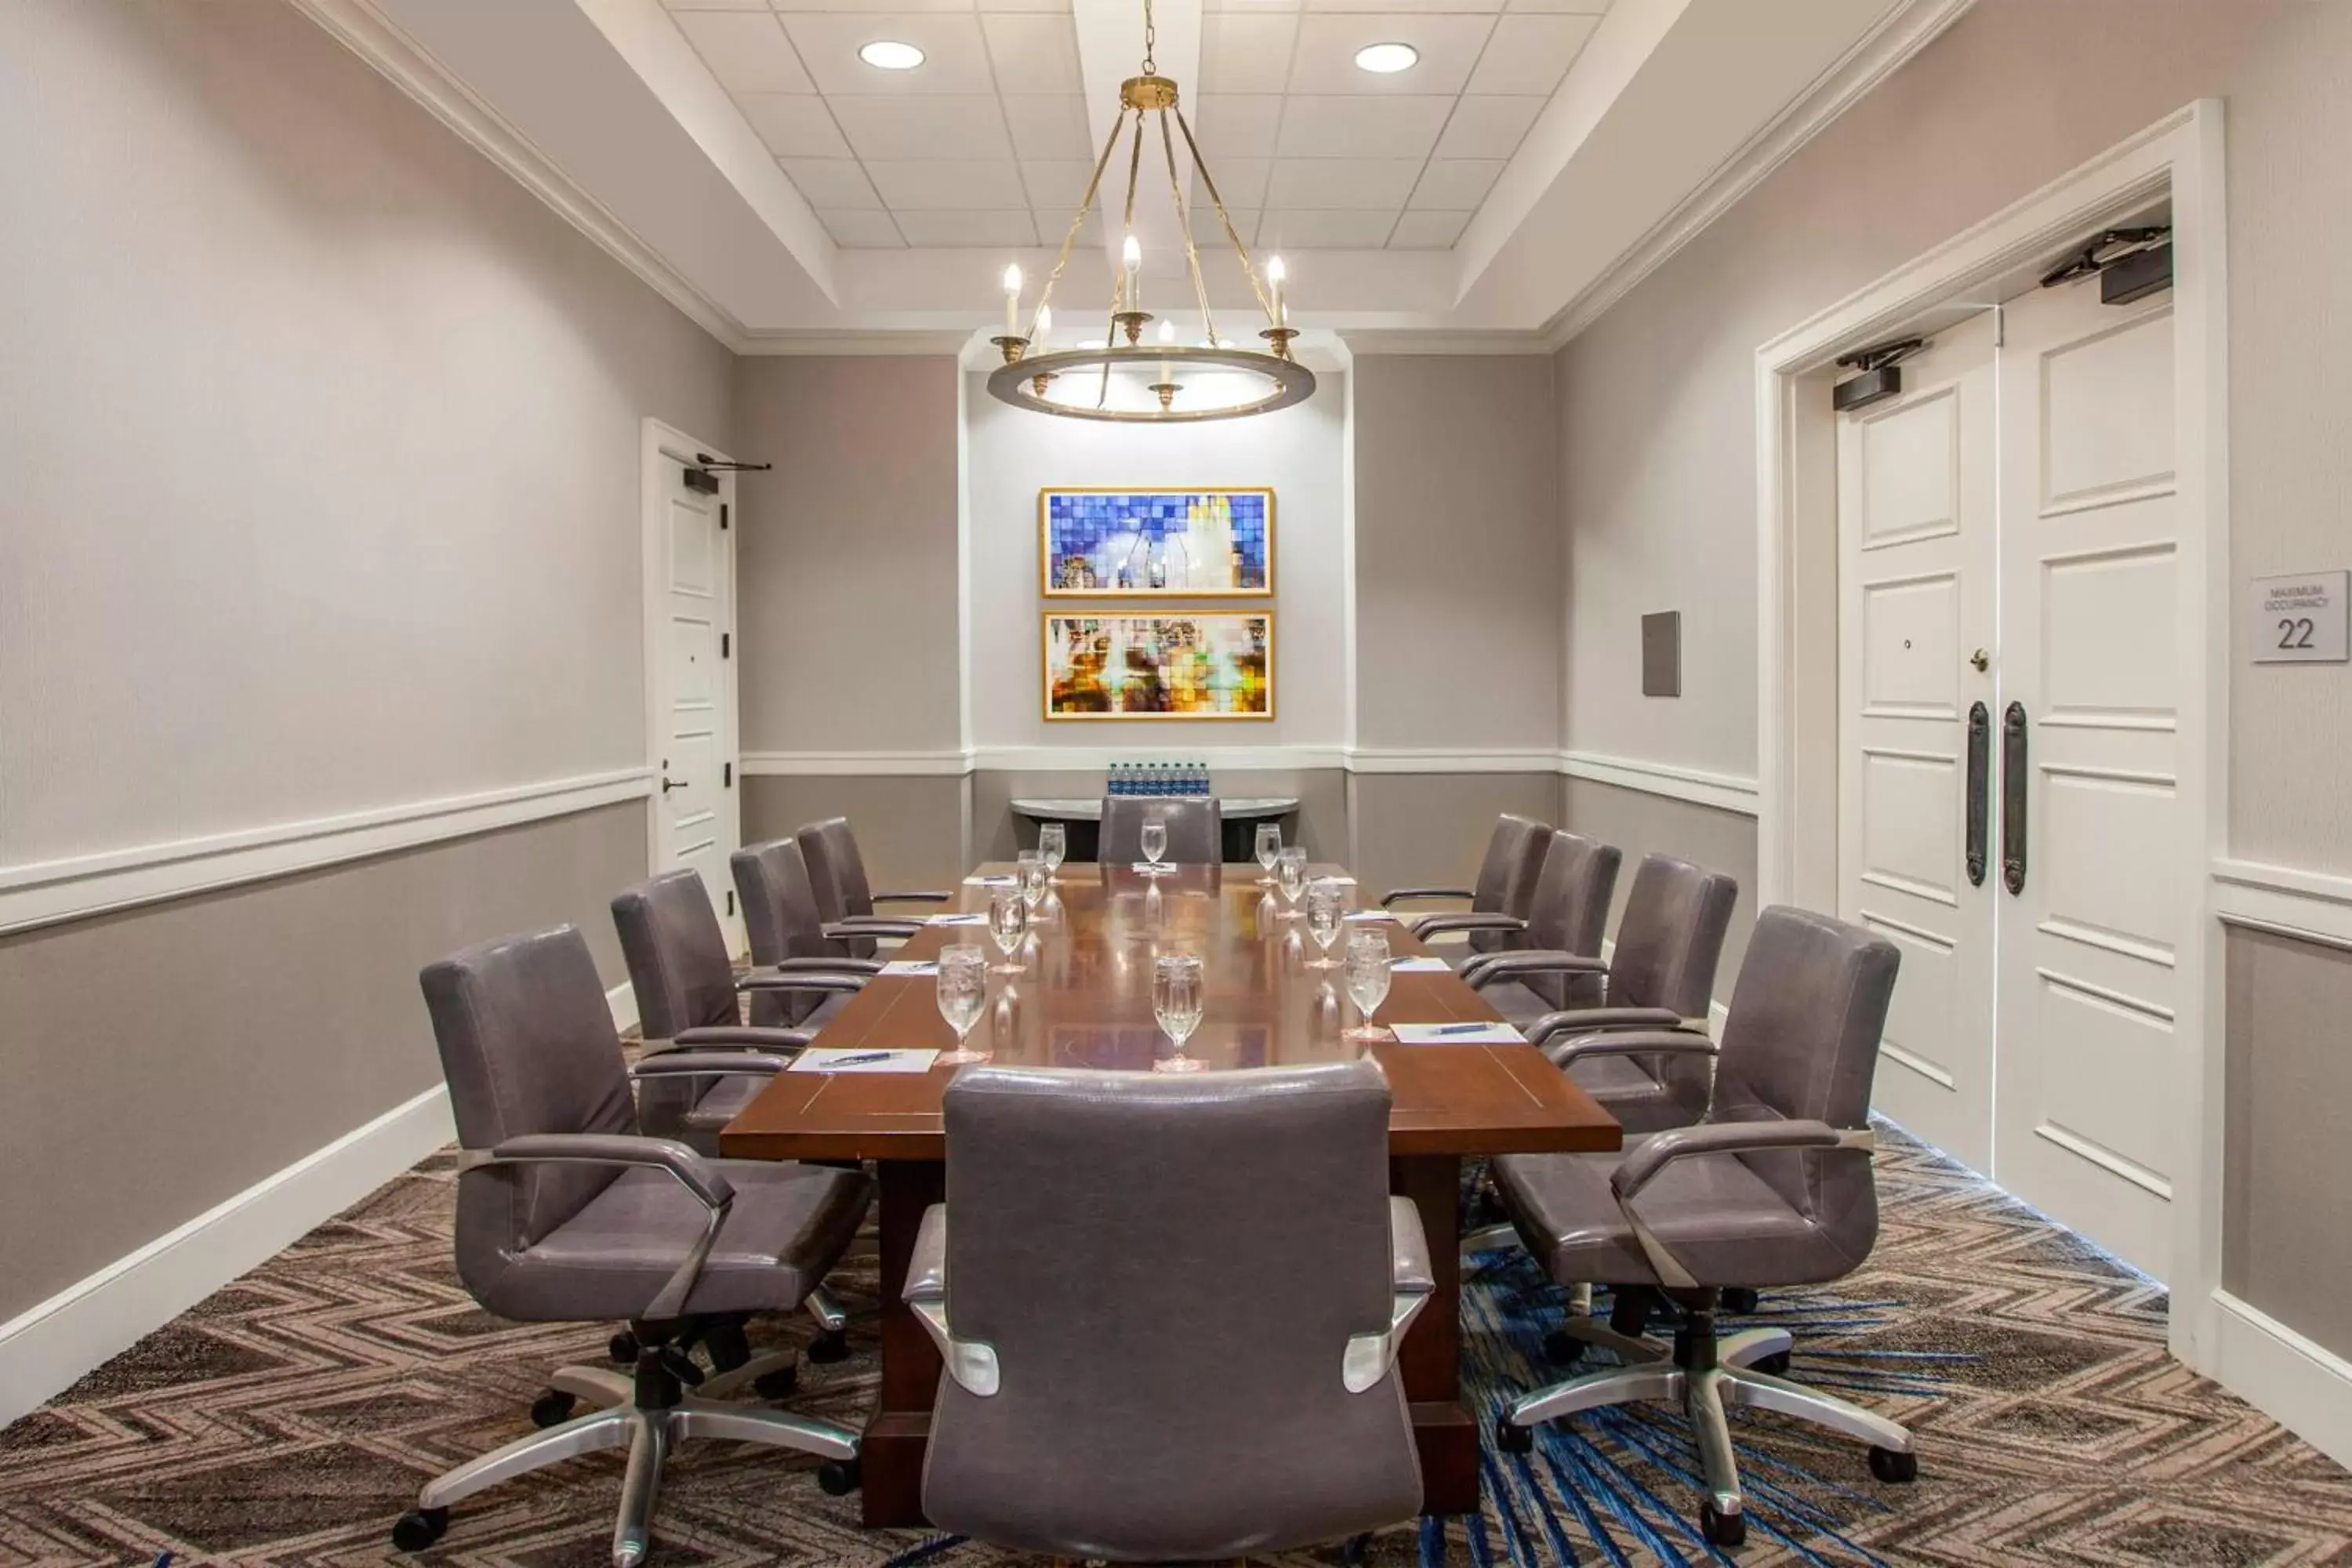 Meeting/conference room in Sheraton Jacksonville Hotel